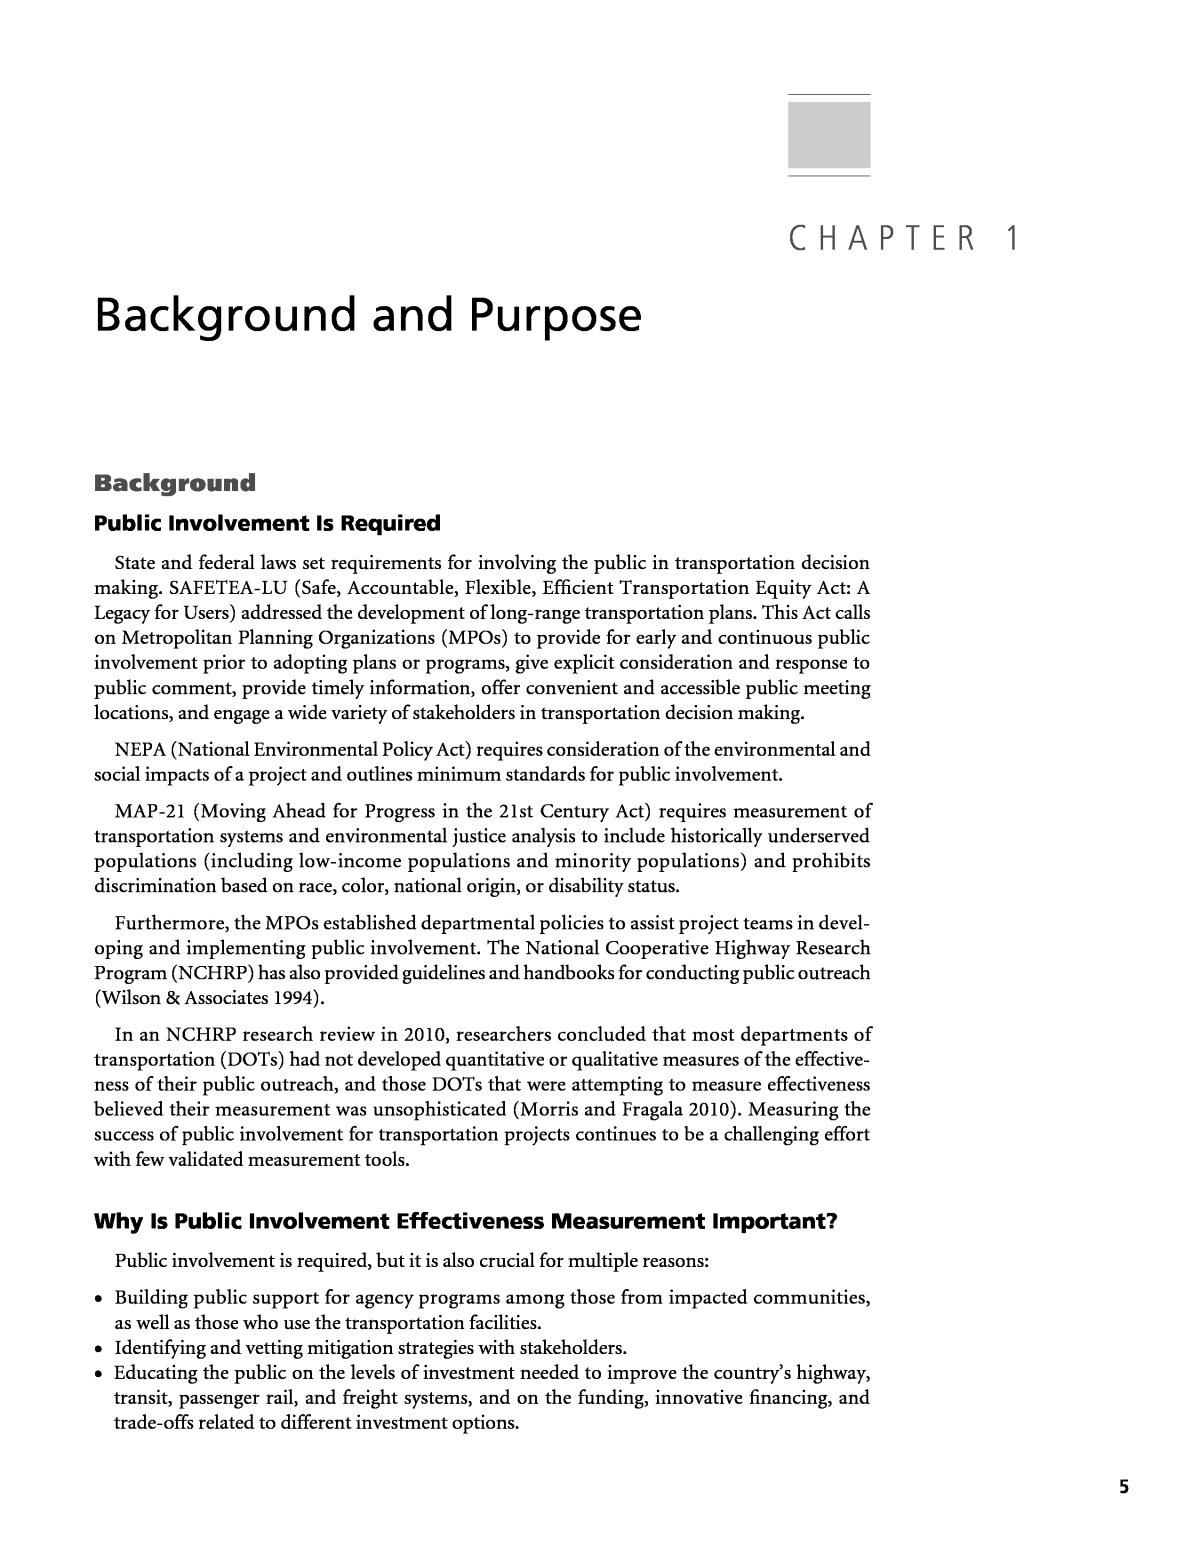 Purpose and Background Information